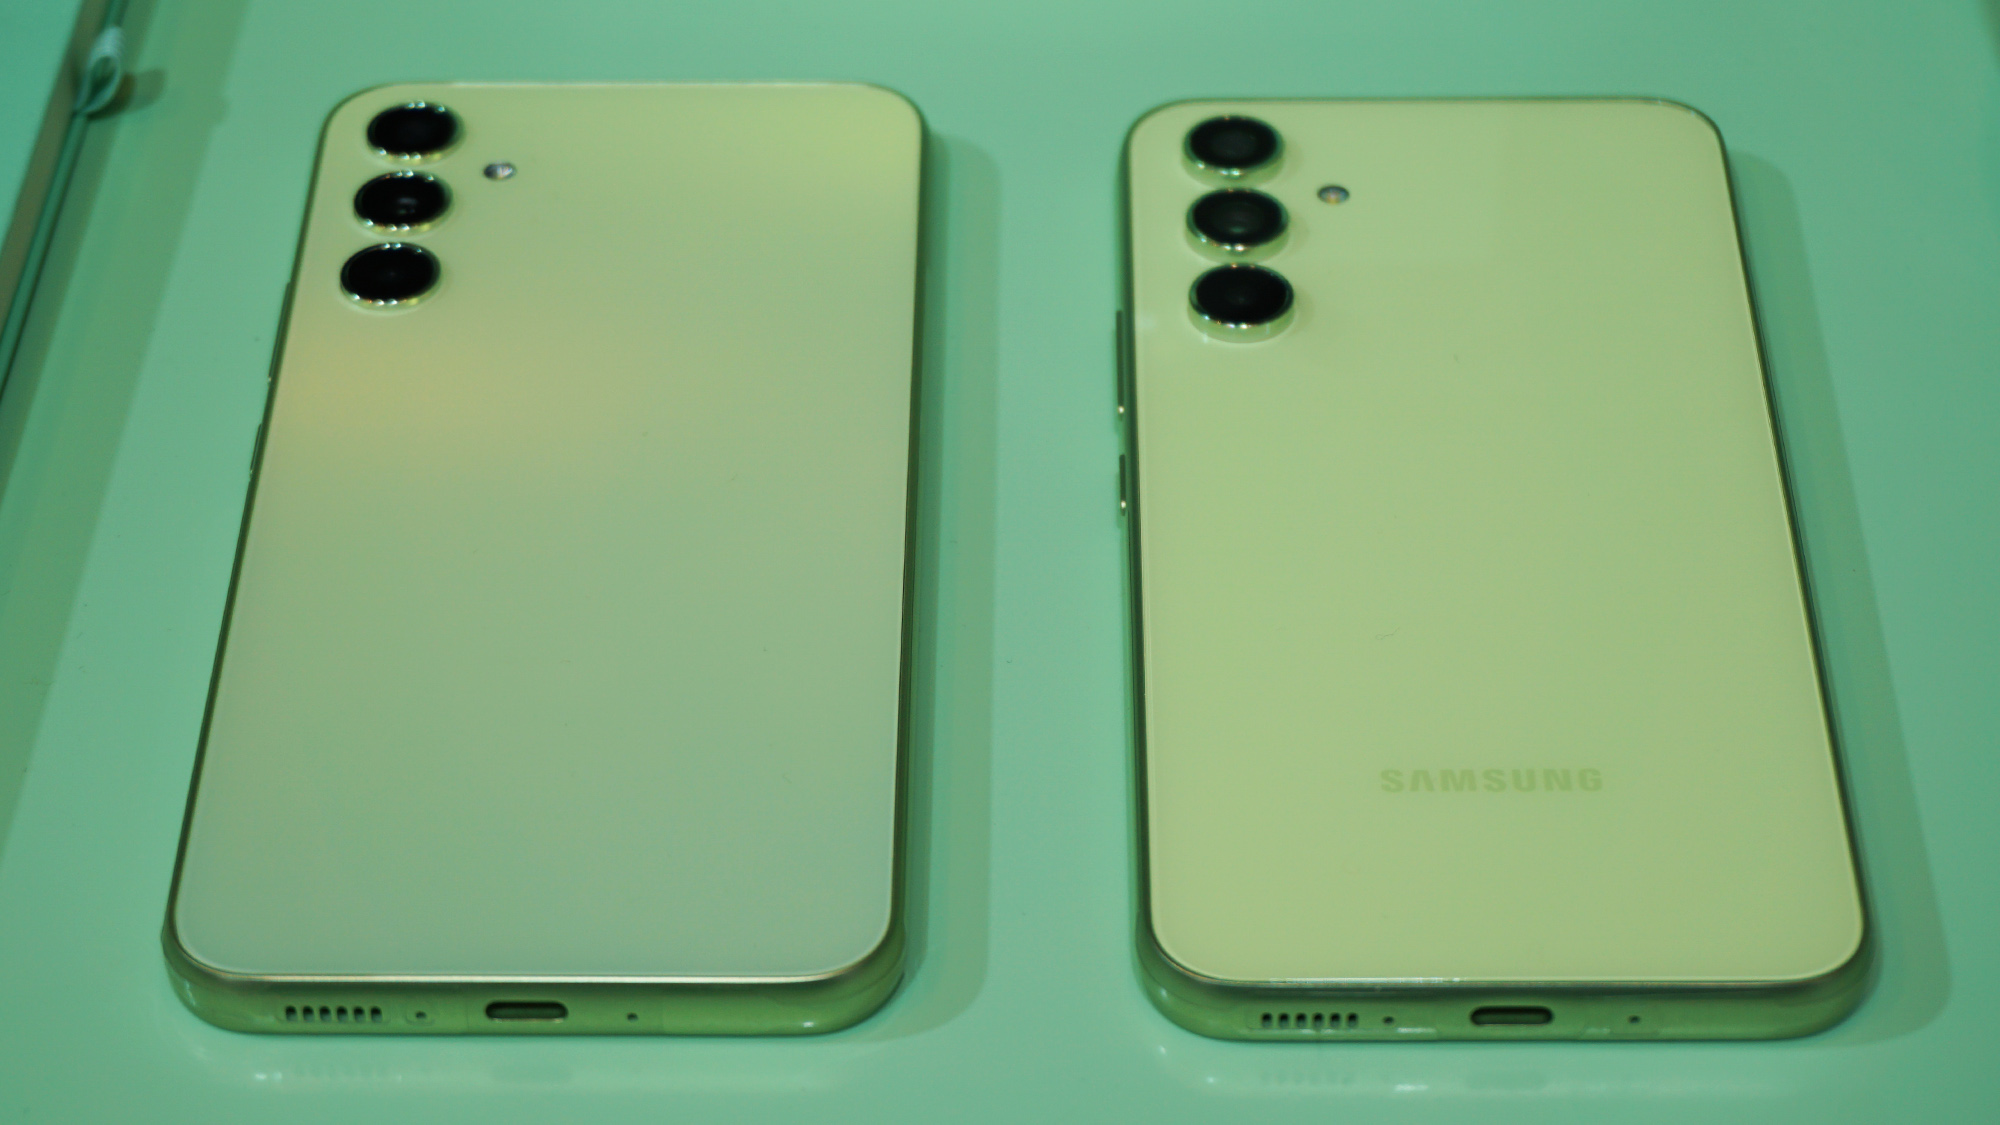 Samsung Galaxy A54 hands-on A34 green back straight perspective